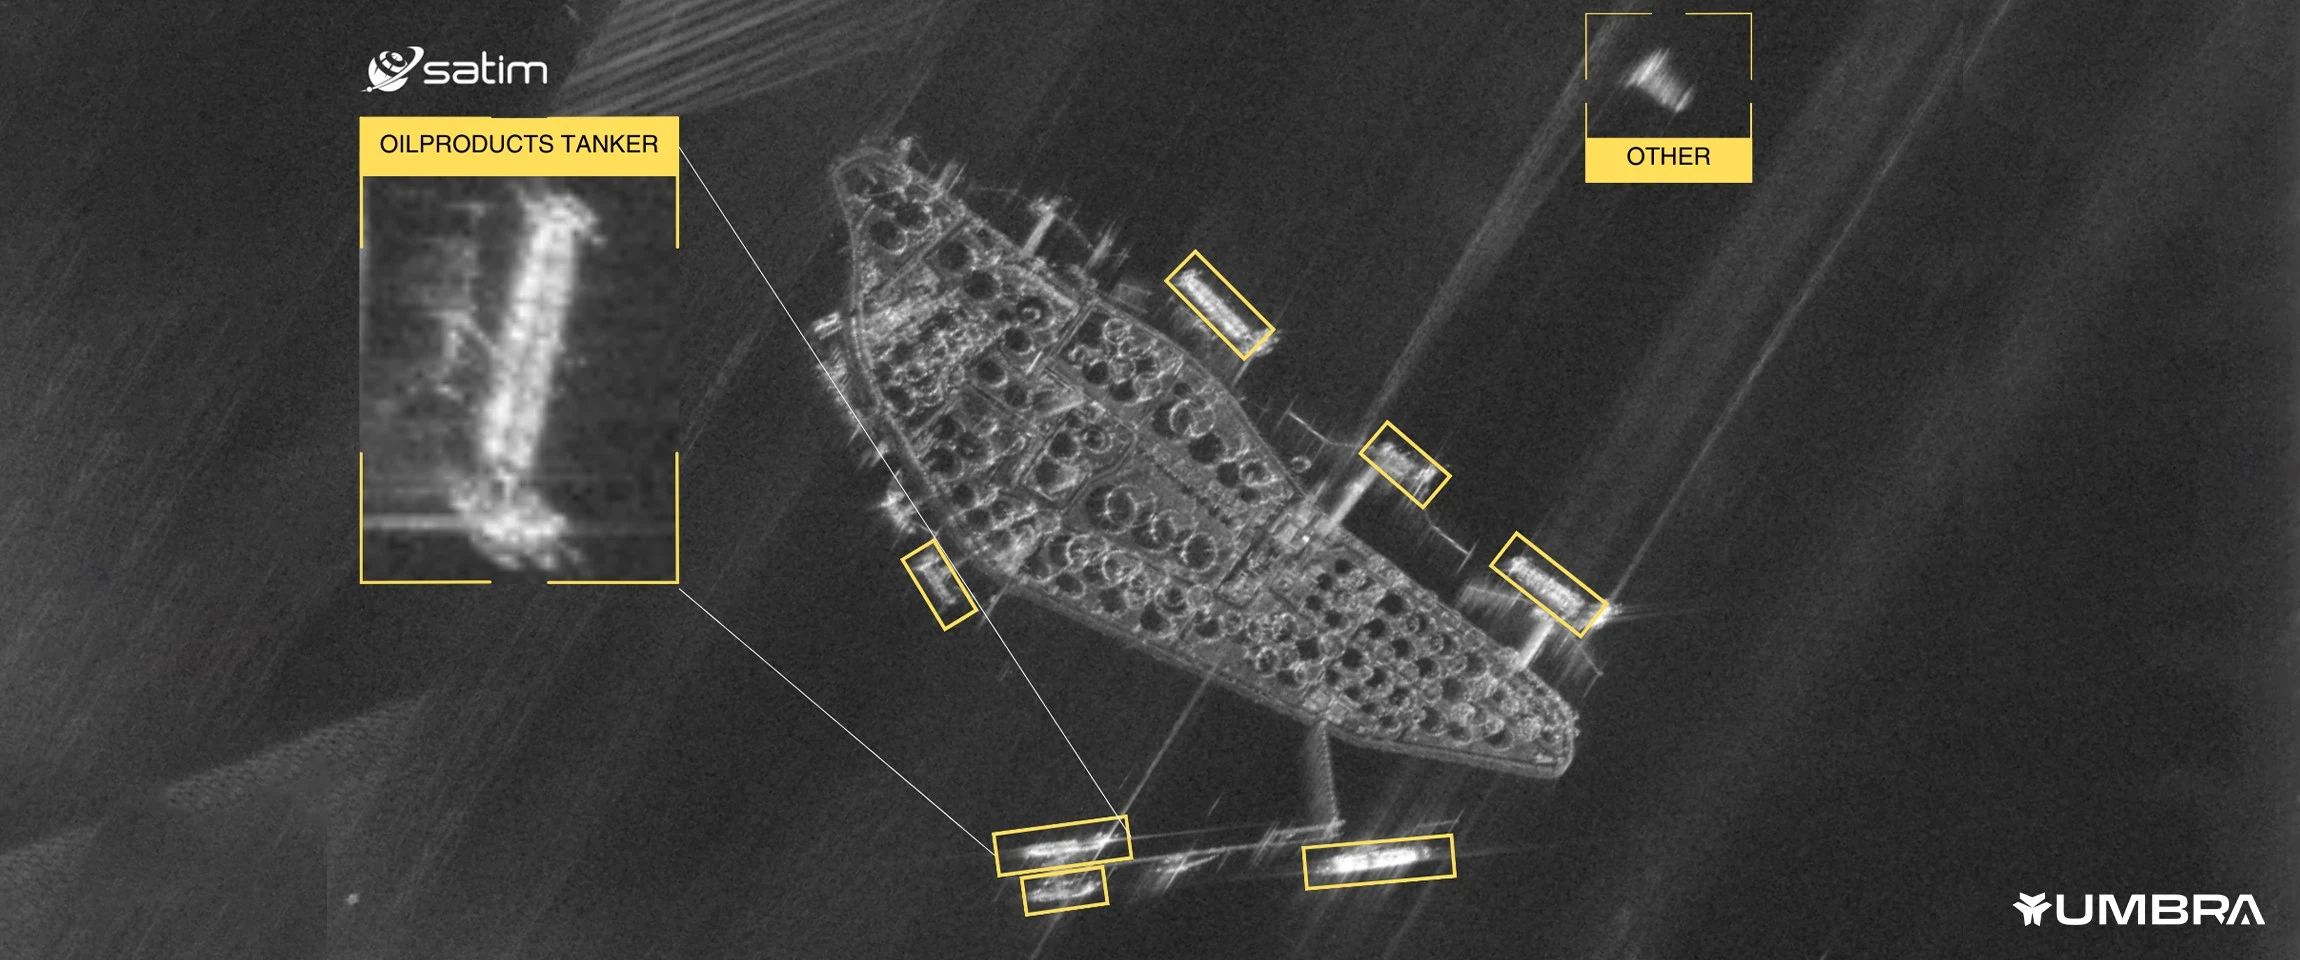 Vessel Detection and Classification